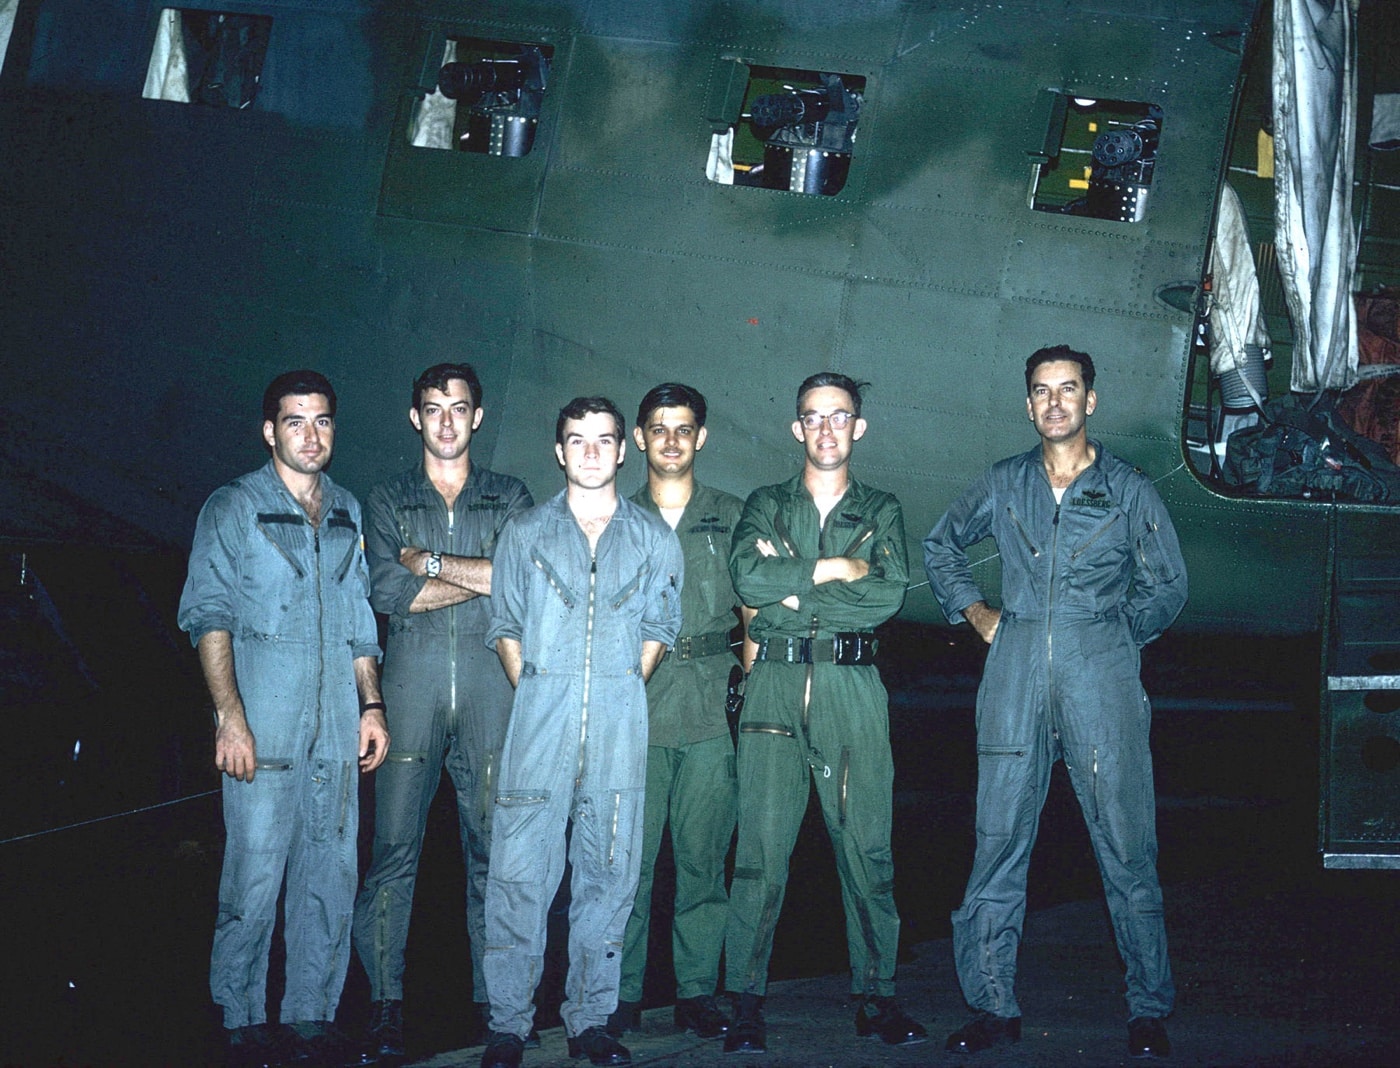 AC-47 flight crew and minigunsIn this photo we see six members of an AC-47 crew. Flight crews typically consisted of seven men — sometimes 8. They were part of the 4th Air Commando Squadron, the first unit to field the AC-47. Initially, it had five converted C-47s. The squadron was later renamed and eventually became the 4th Special Operations Squadron. It continues to operate today using Lockheed AC-130J aircraft to provide close air support and other special operations missions. The 4th is based at Hulburt Field in Florida.